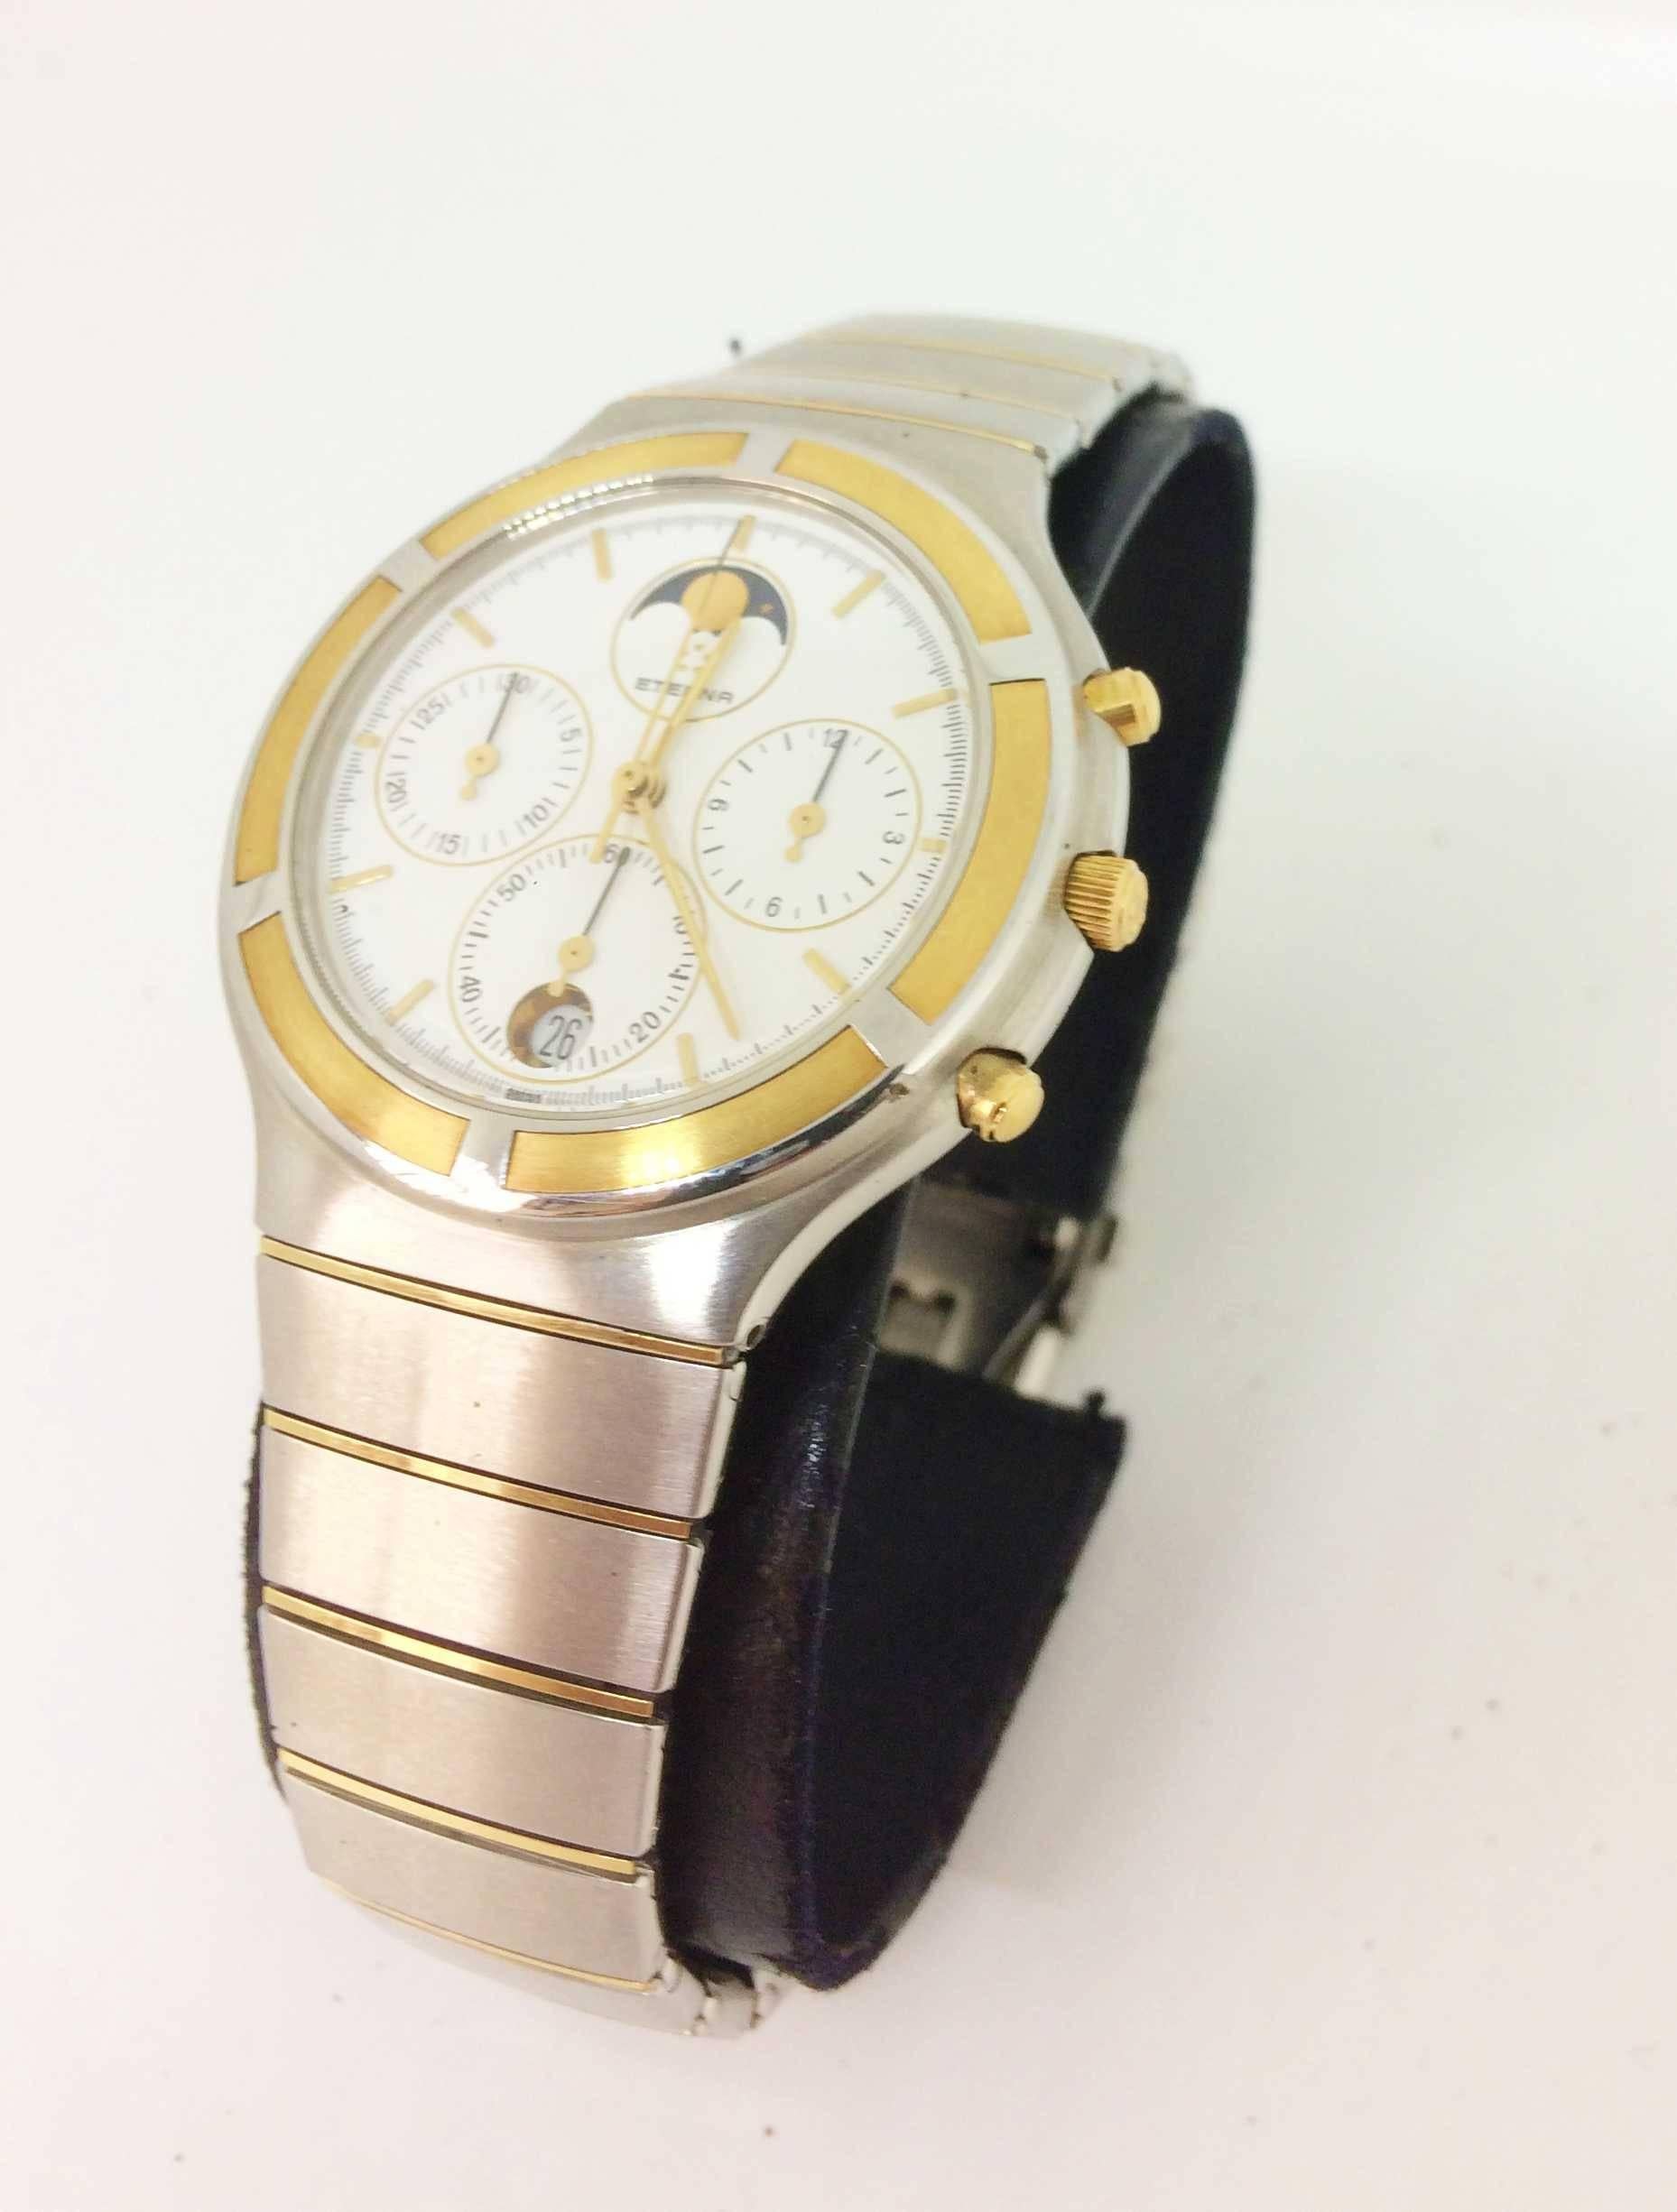 Gold and Steel
Gold and Steel Bracelet 

White Dial 
Gold and Steel Bezel 
3 counters
Date at 6 o'clock

Moon Phase

High resolution quartz

New battery
New stock

New value: € 2,800
Selling price: 690 €

1 year warranty